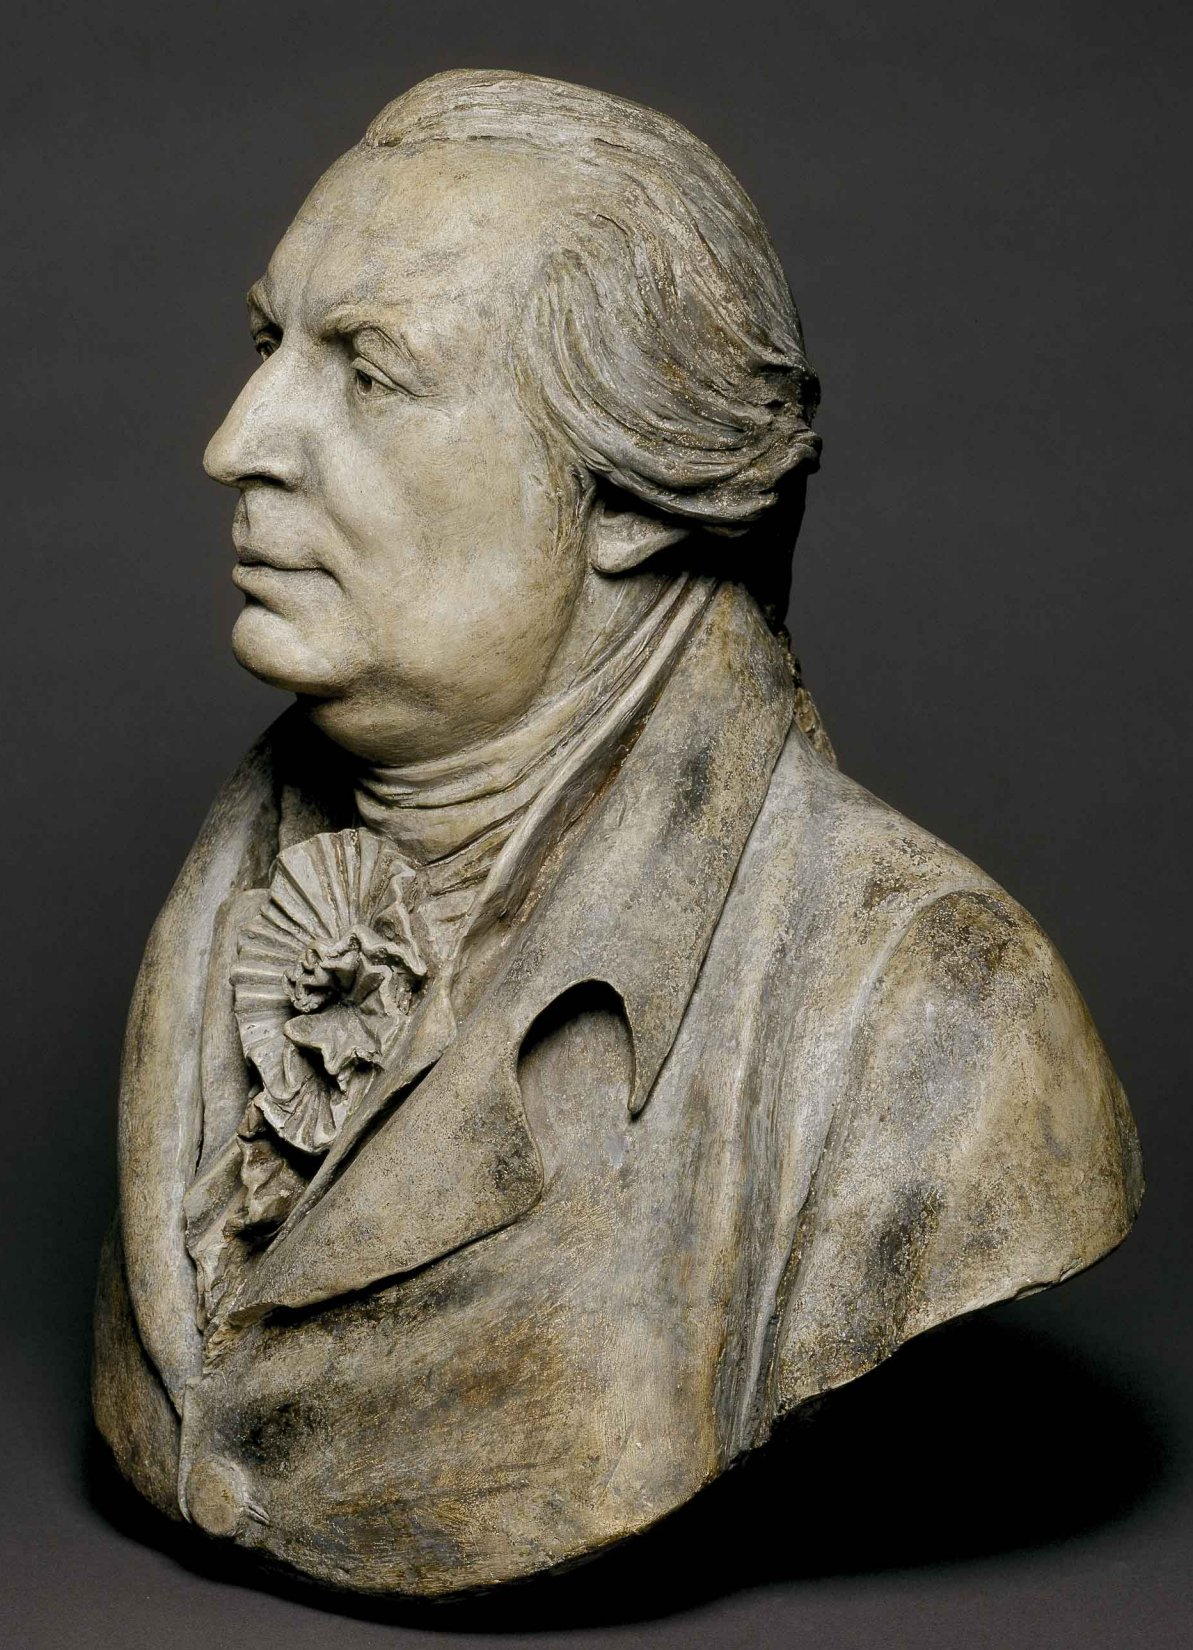 A picture of Gouverneur Morris from 1789.